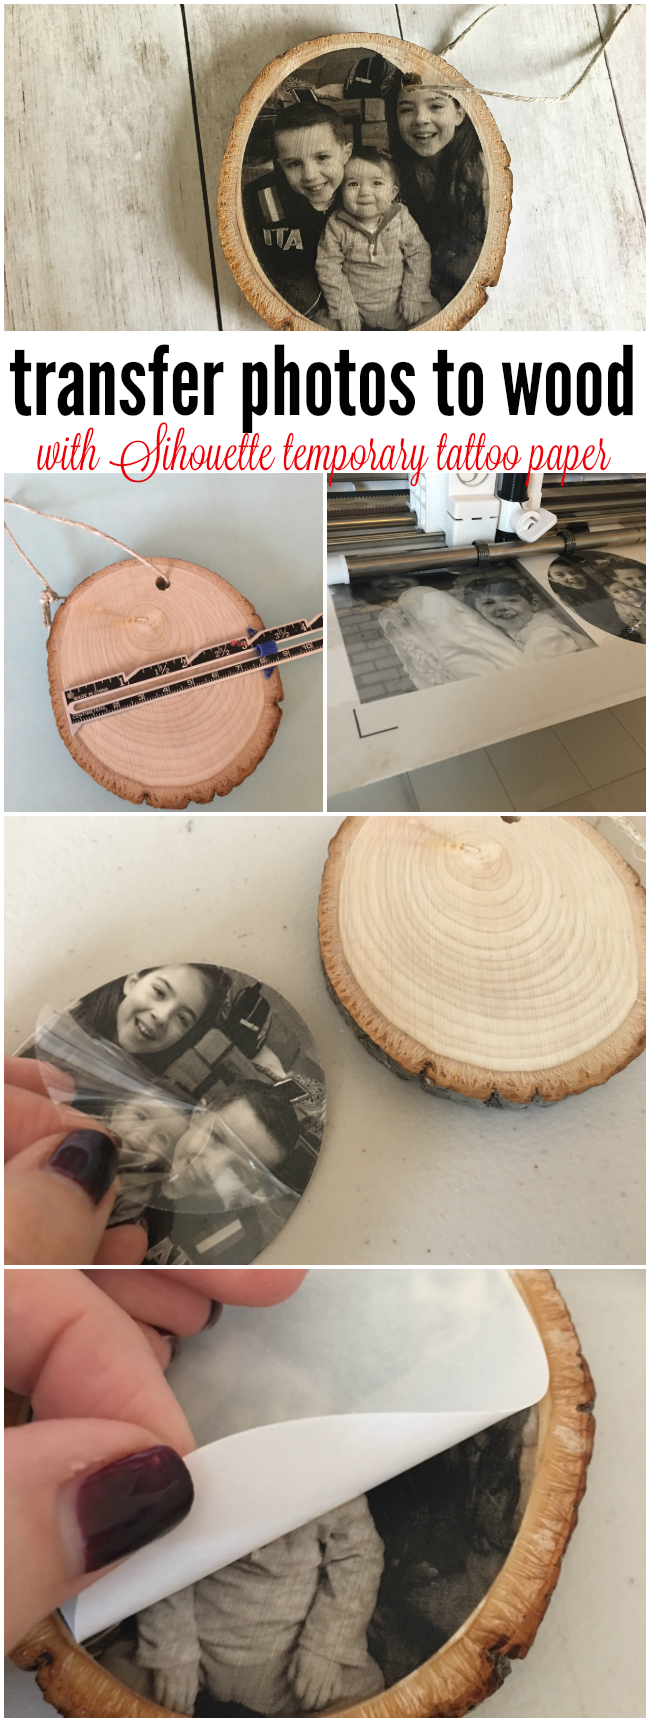 Transferring Photos to Wood with Silhouette Temporary Tattoo Paper